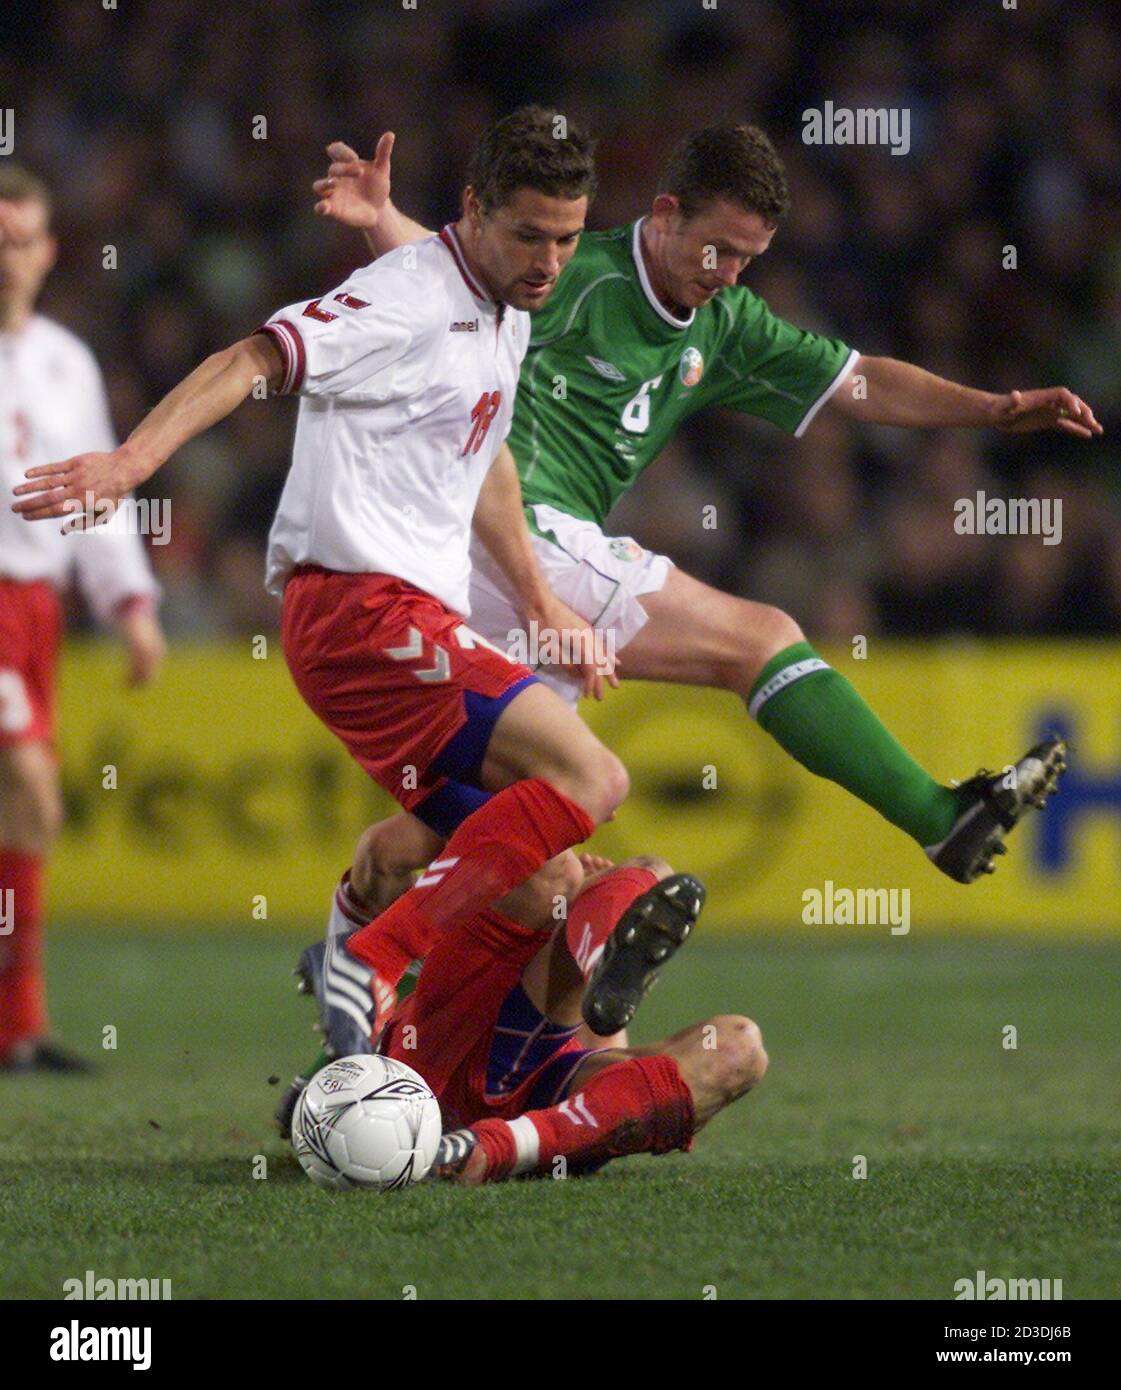 DENMARKS MADSEN AND SAND CLASH WITH IRELAND'S KINSELLA DURING FRIENDLY  MATCH AT LANSDOWNE ROAD DUBLIN. Denmarks's Peter Madsen (L) and Republic of  Ireland's Mark Kinsella (R) stumble over Denmarks Ebbe Sand during